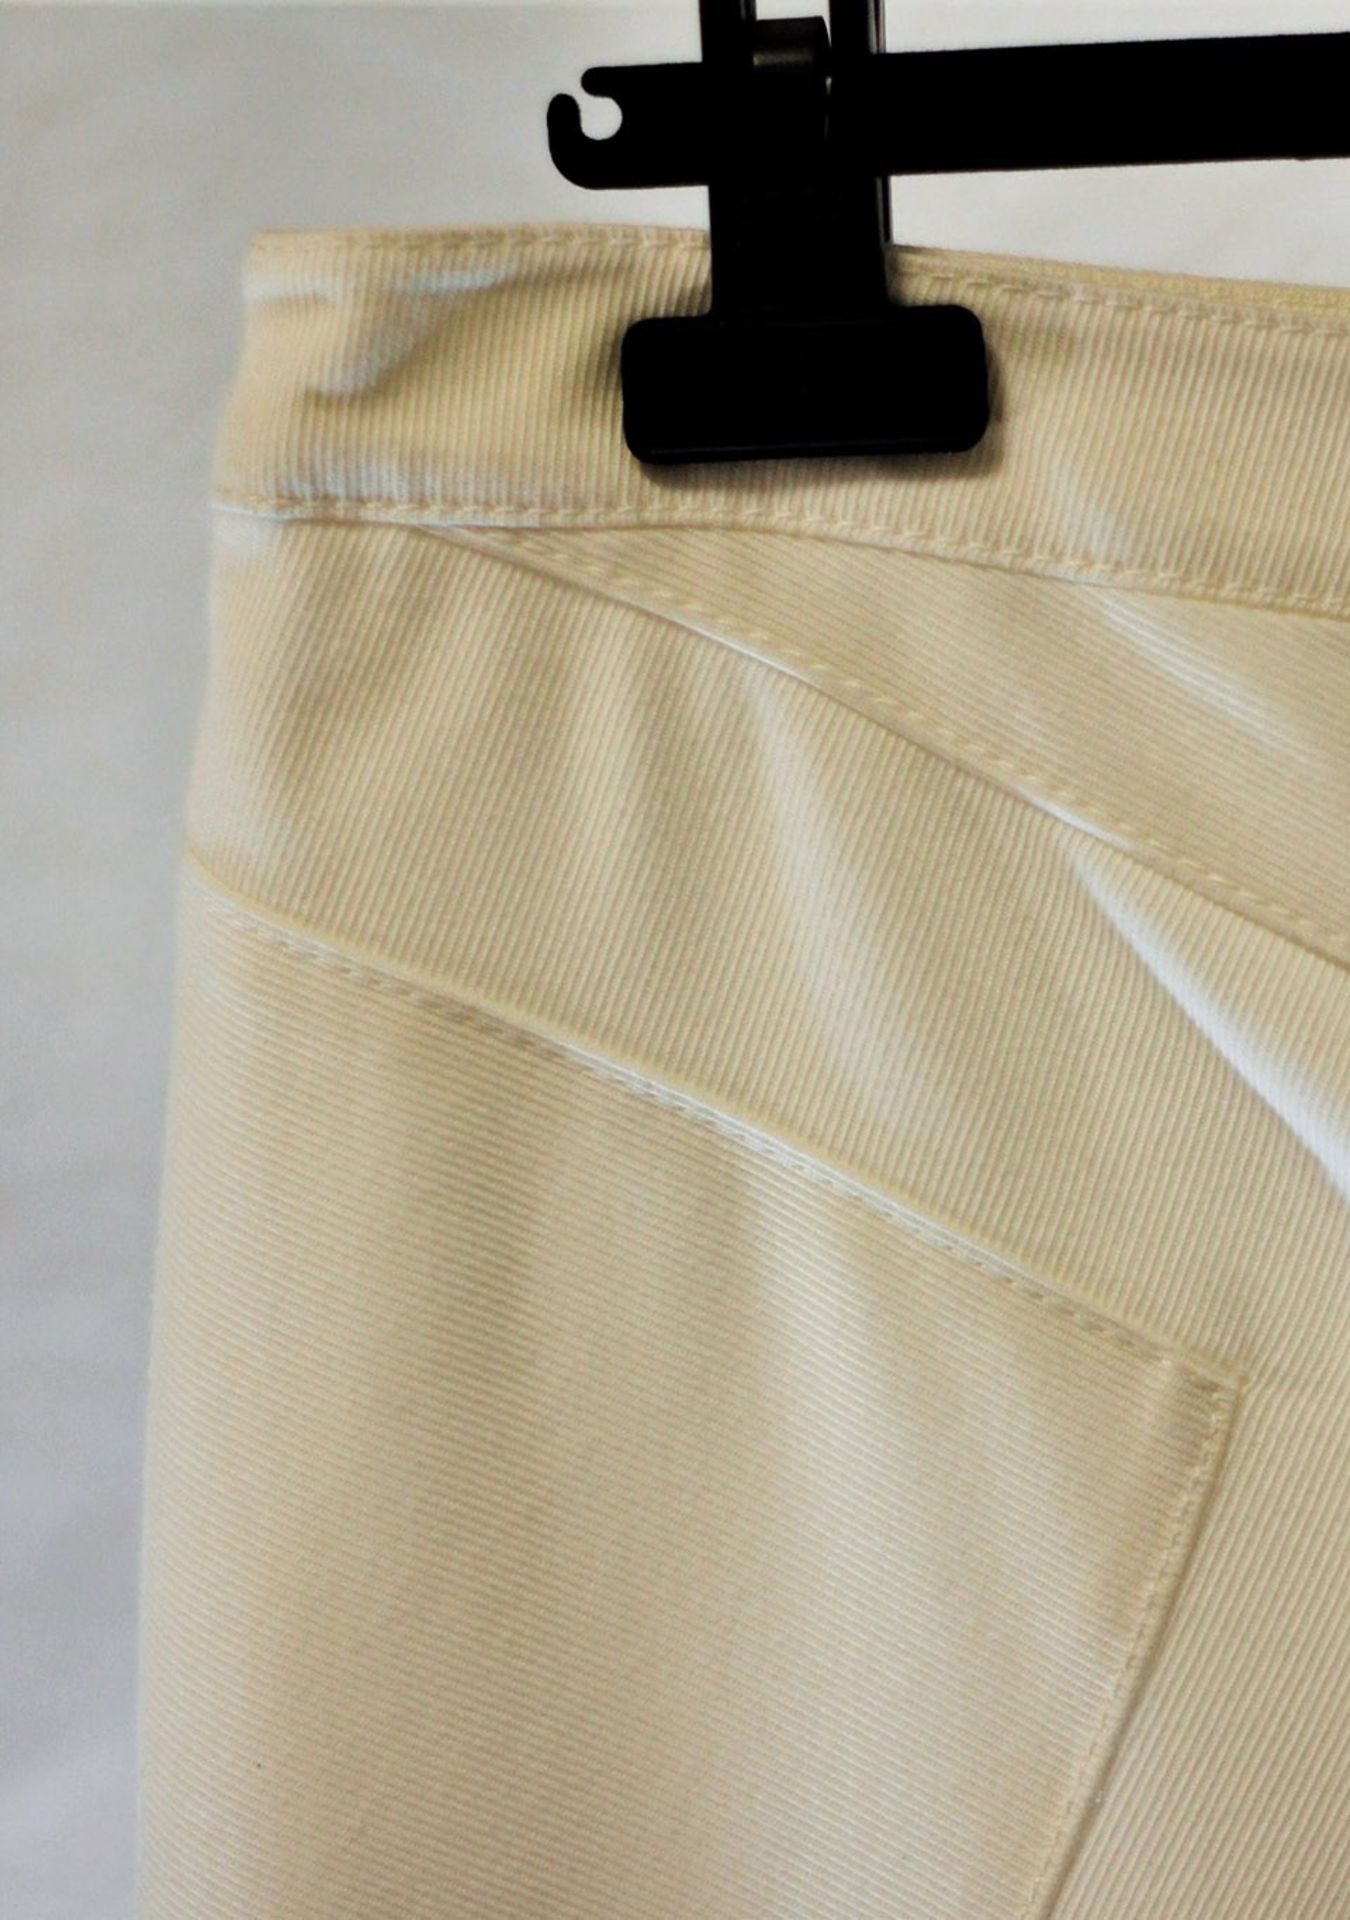 1 x Valentino Cream Trousers - Size: 14 - Material: 98% Cotton, 2% Elastane. Lining 100% Polyester - - Image 4 of 5